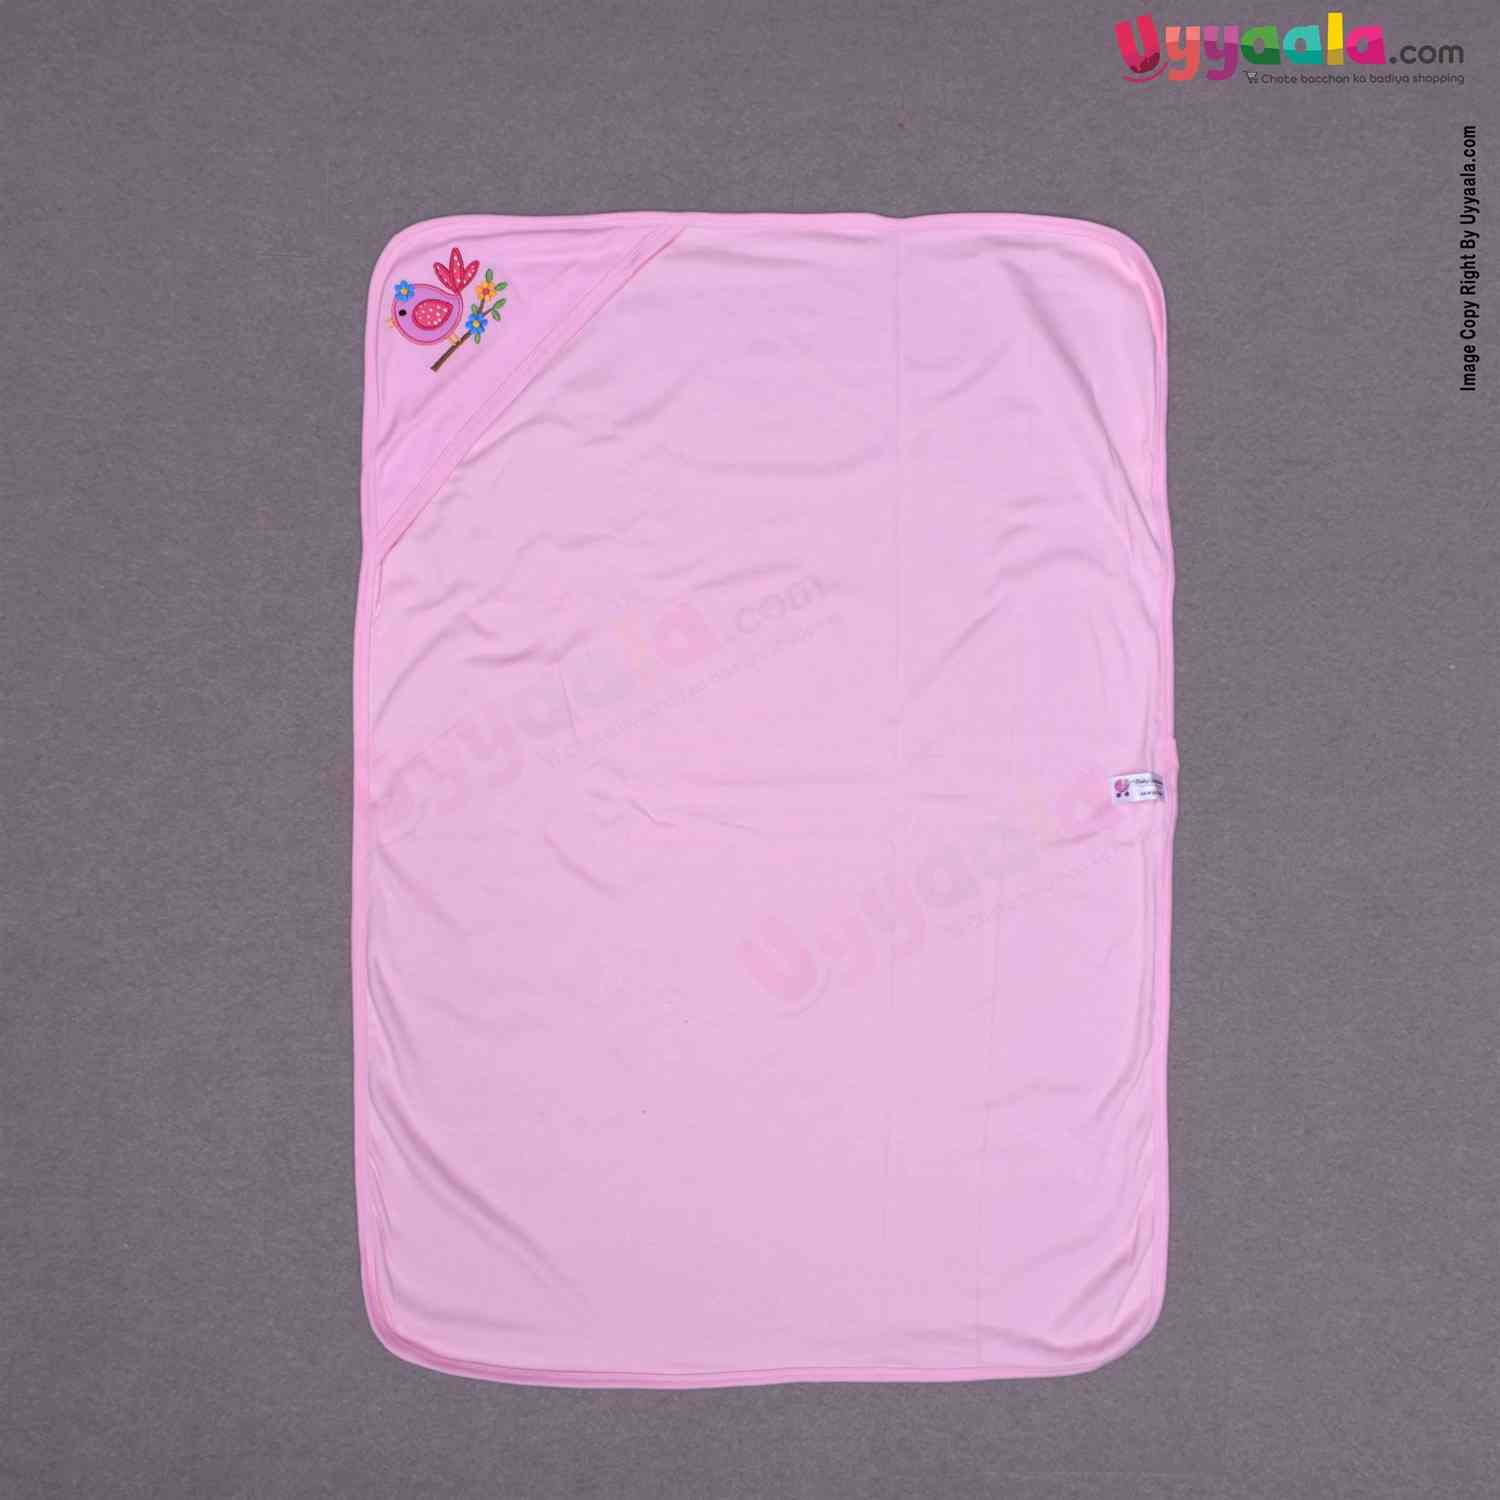 BABY STATION Hooded Double Layer Towel